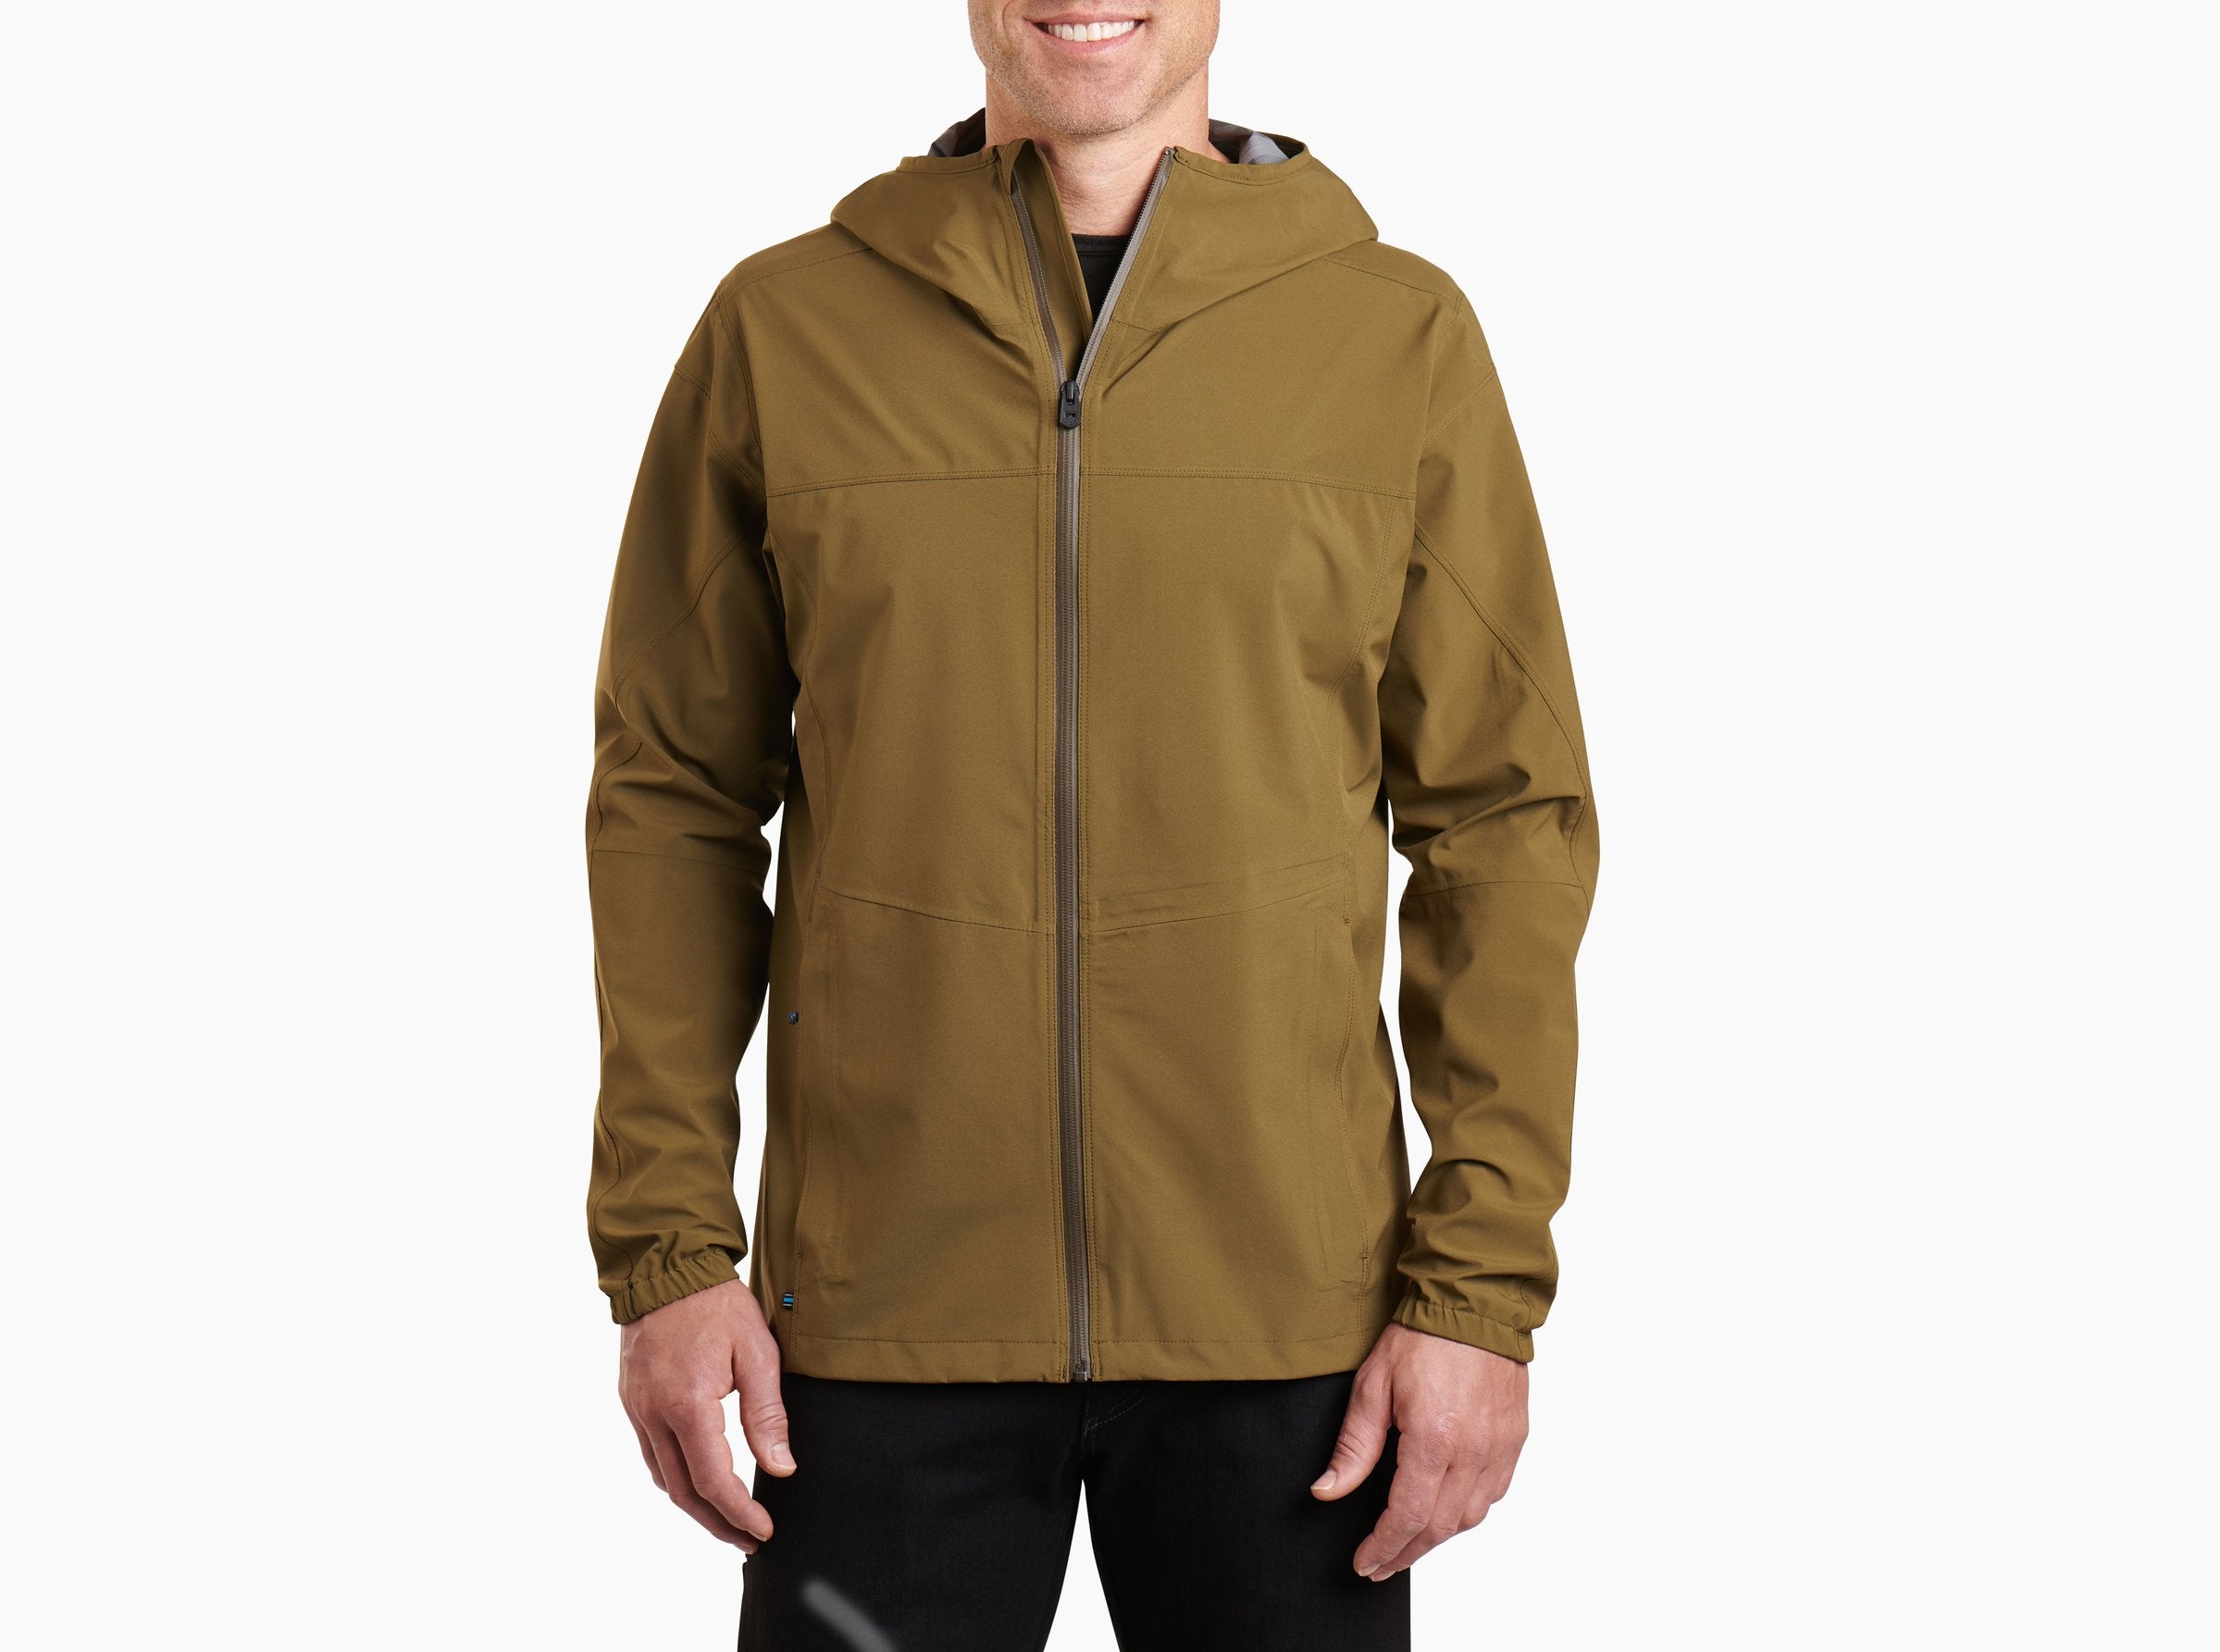 A little bit of rain never hurt anybody, especially with the Kuhl Stretch  Voyagr Jacket! A waterproof jacket with stretch & breathability